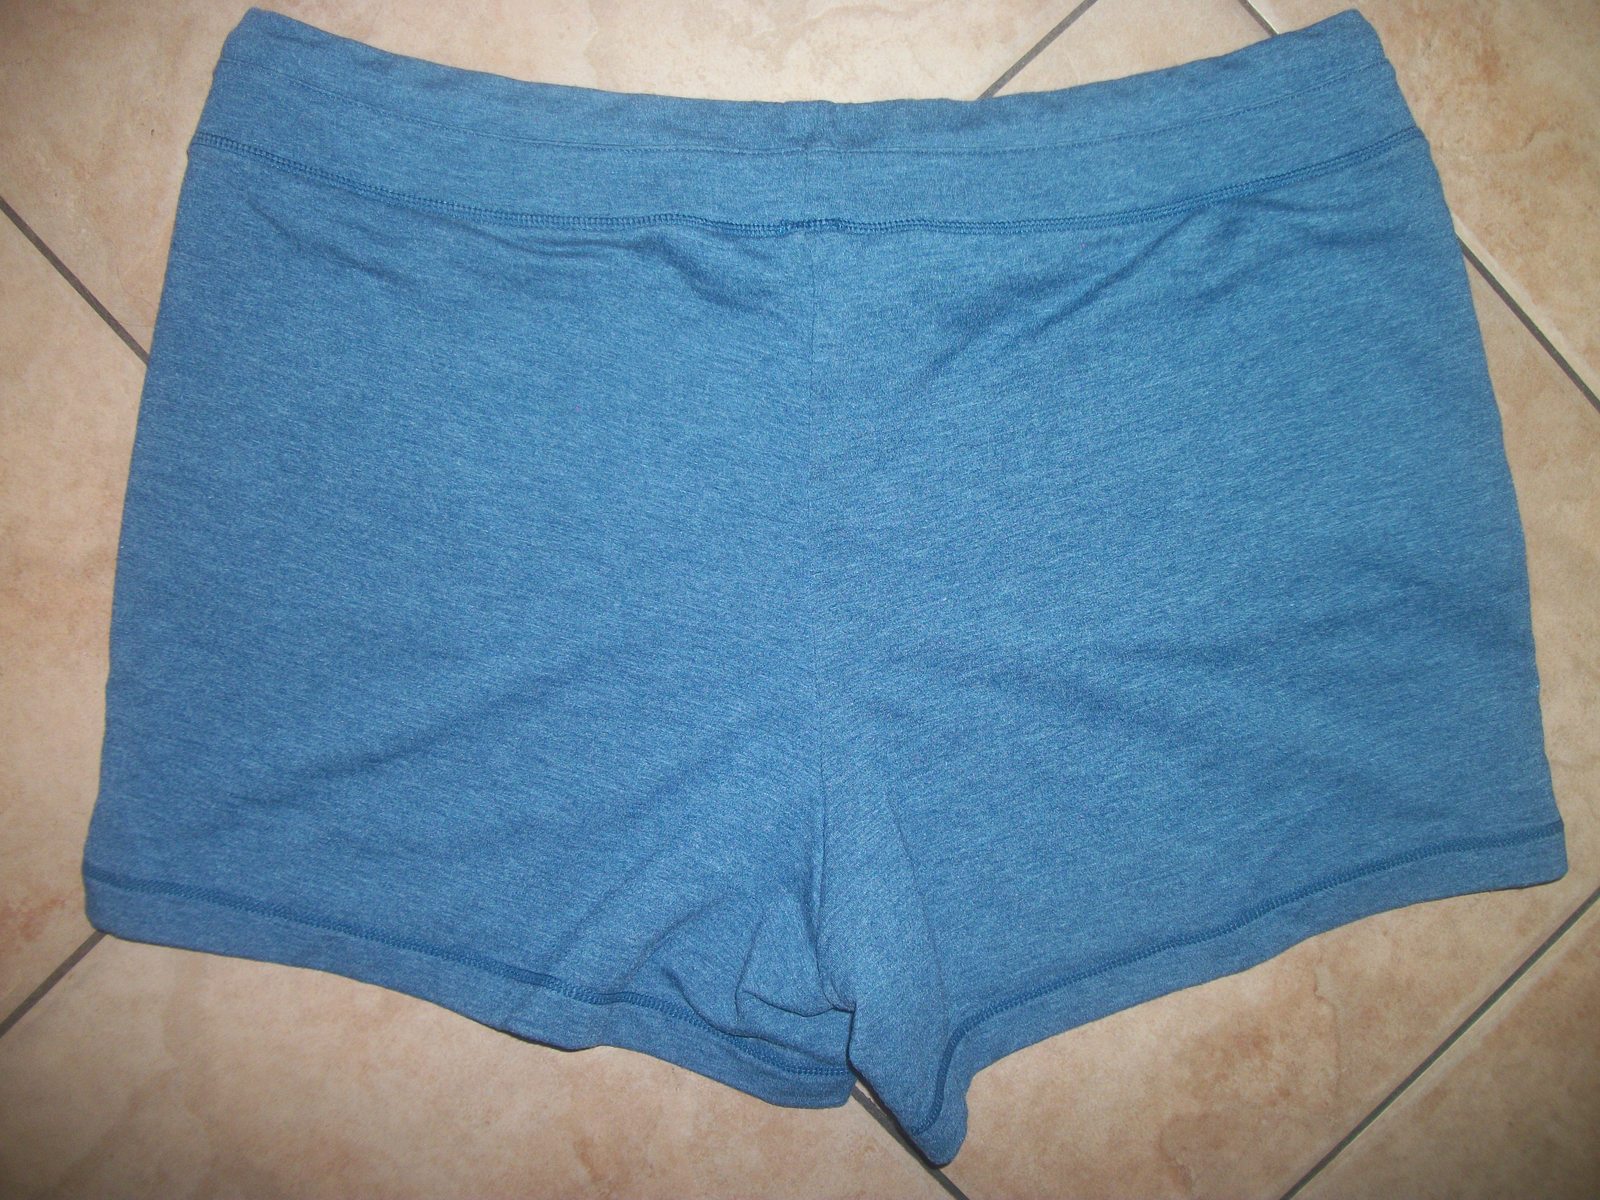 Primary image for Women's shorts activewear size large with drawstring 32 degrees cool nwot